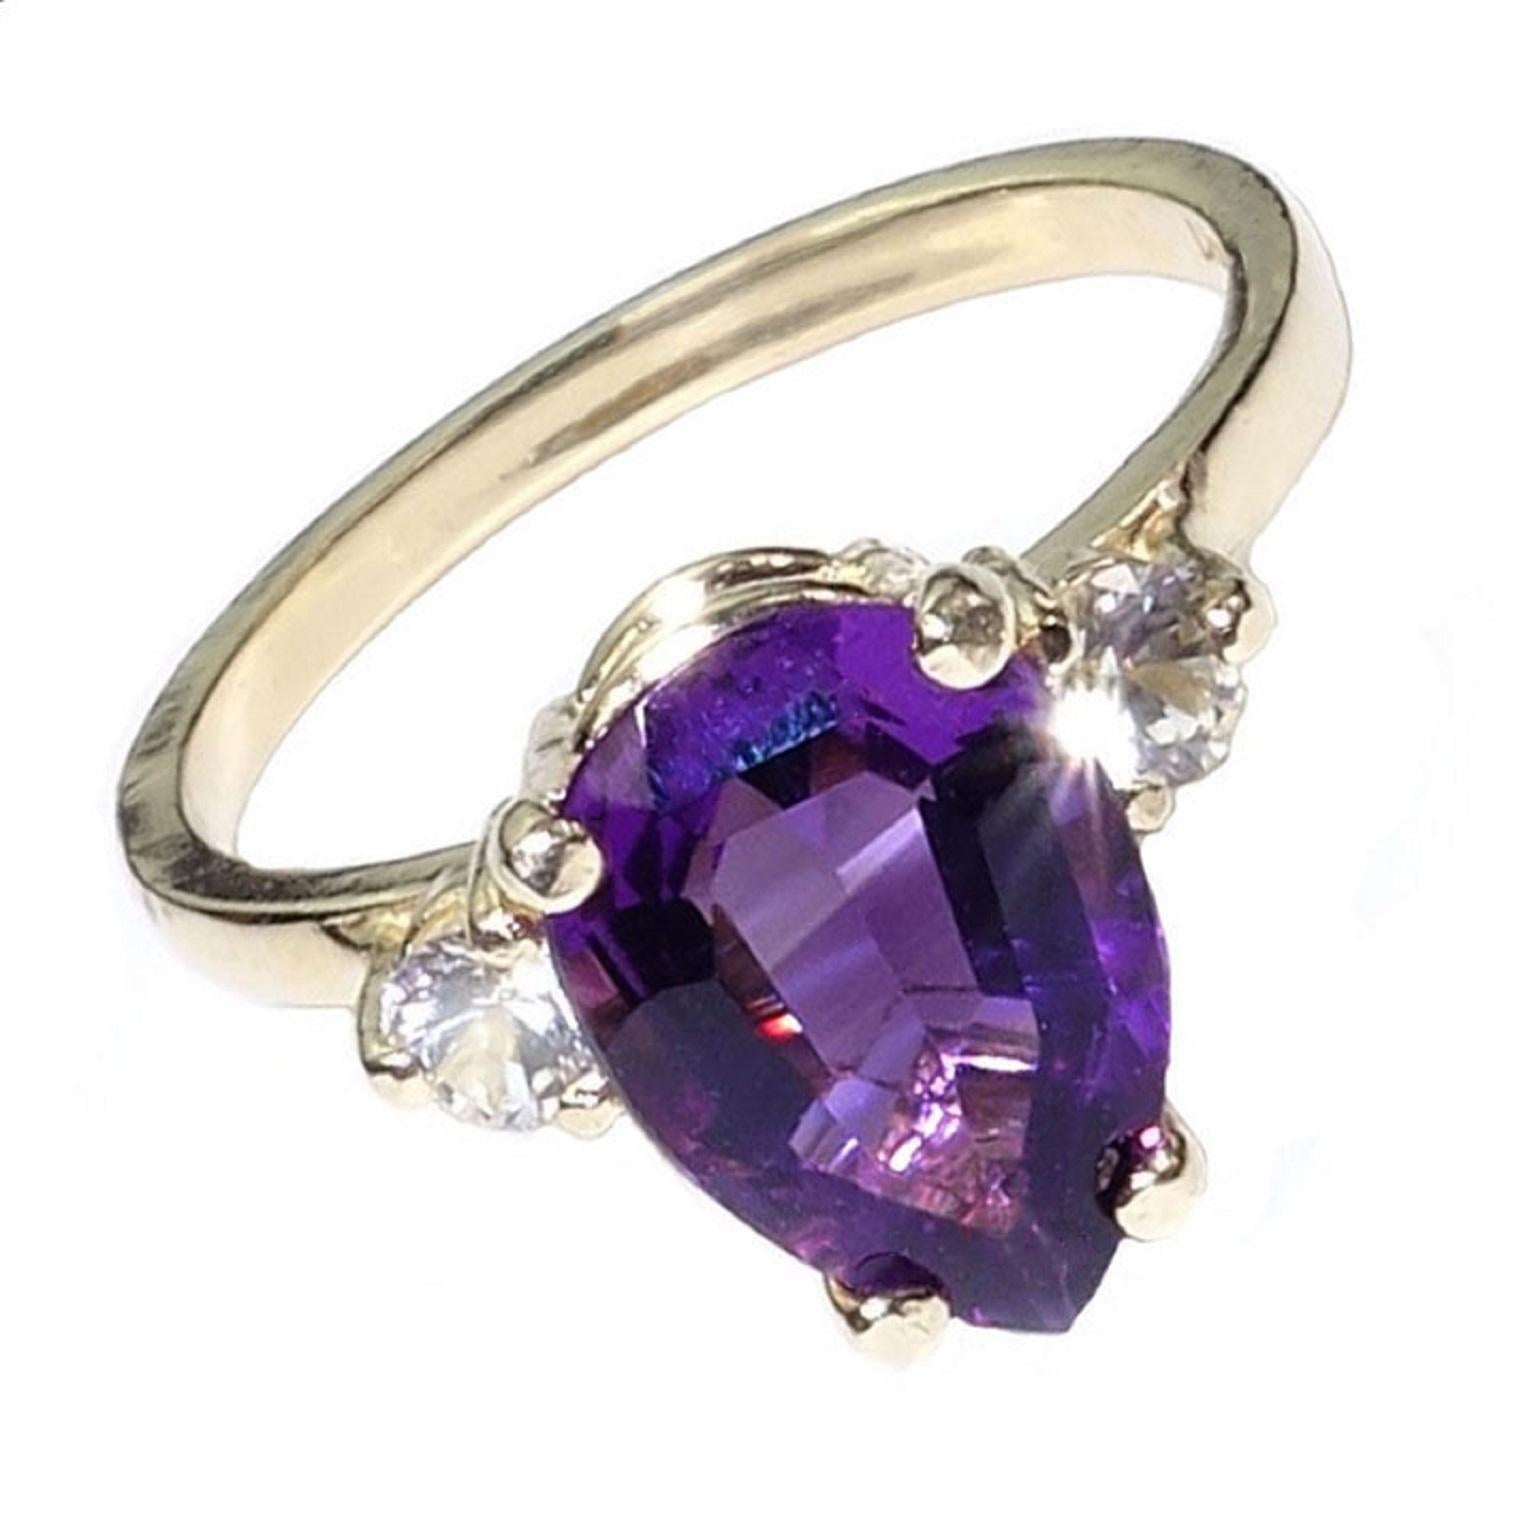 Gorgeous, sparkling Brazilian Amethyst set in 14k Yellow gold ring.  This bright pear shaped Amethyst is enhanced by two White Sapphires.  The Amethyst is 1.86ct and the two White Sapphires are each 3mm.  Amethyst is the February birthstone.  Size 7